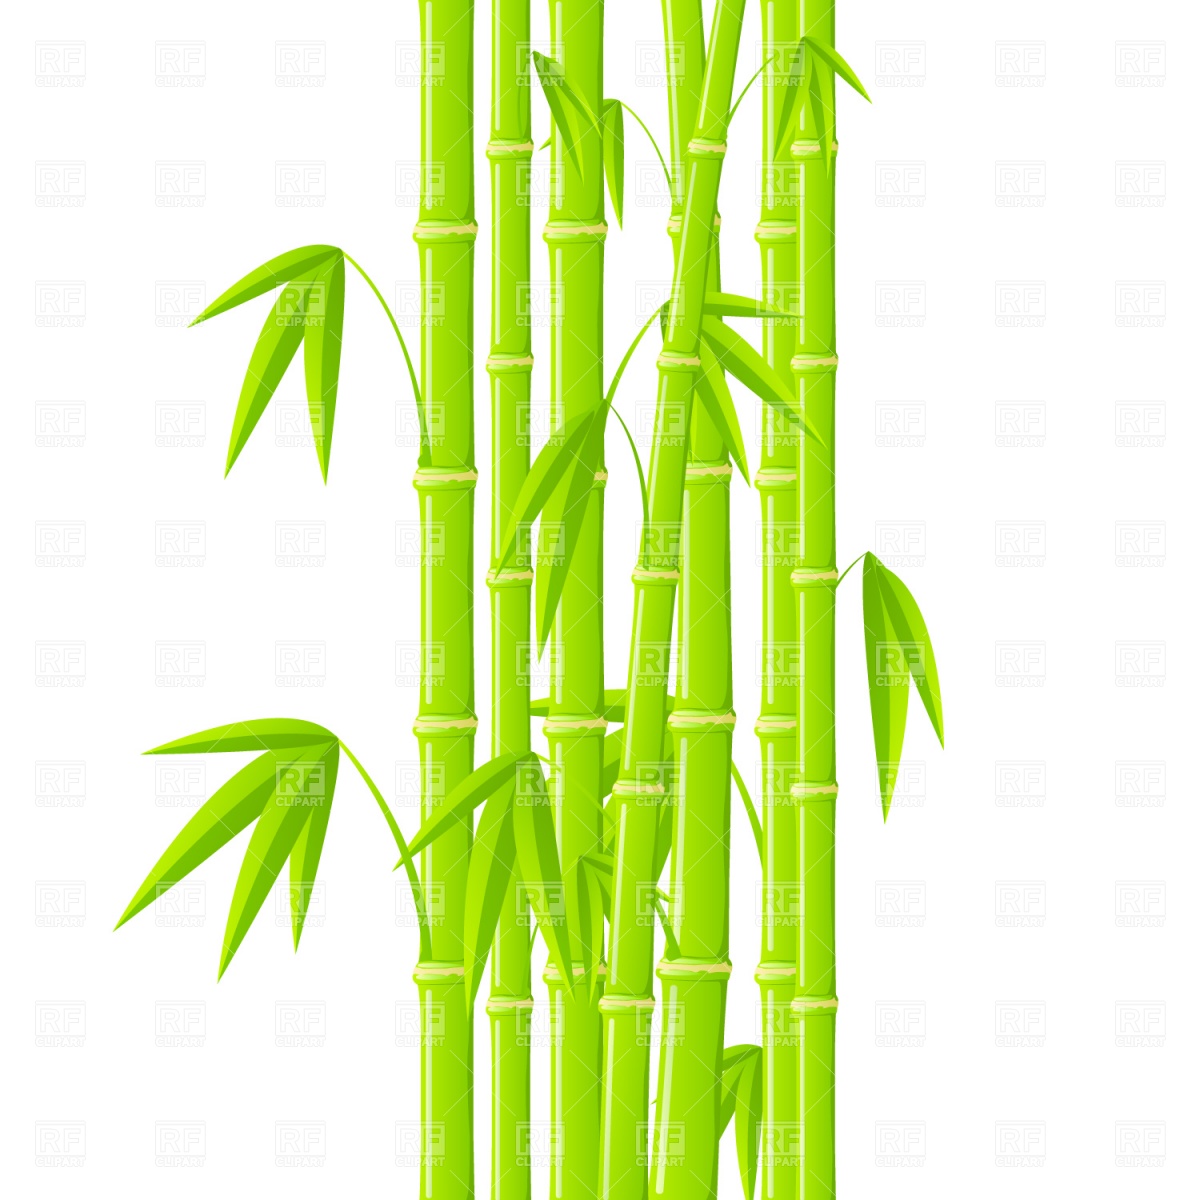 Green Bamboo Stems With Leaves Download Royalty Free Vector Clipart